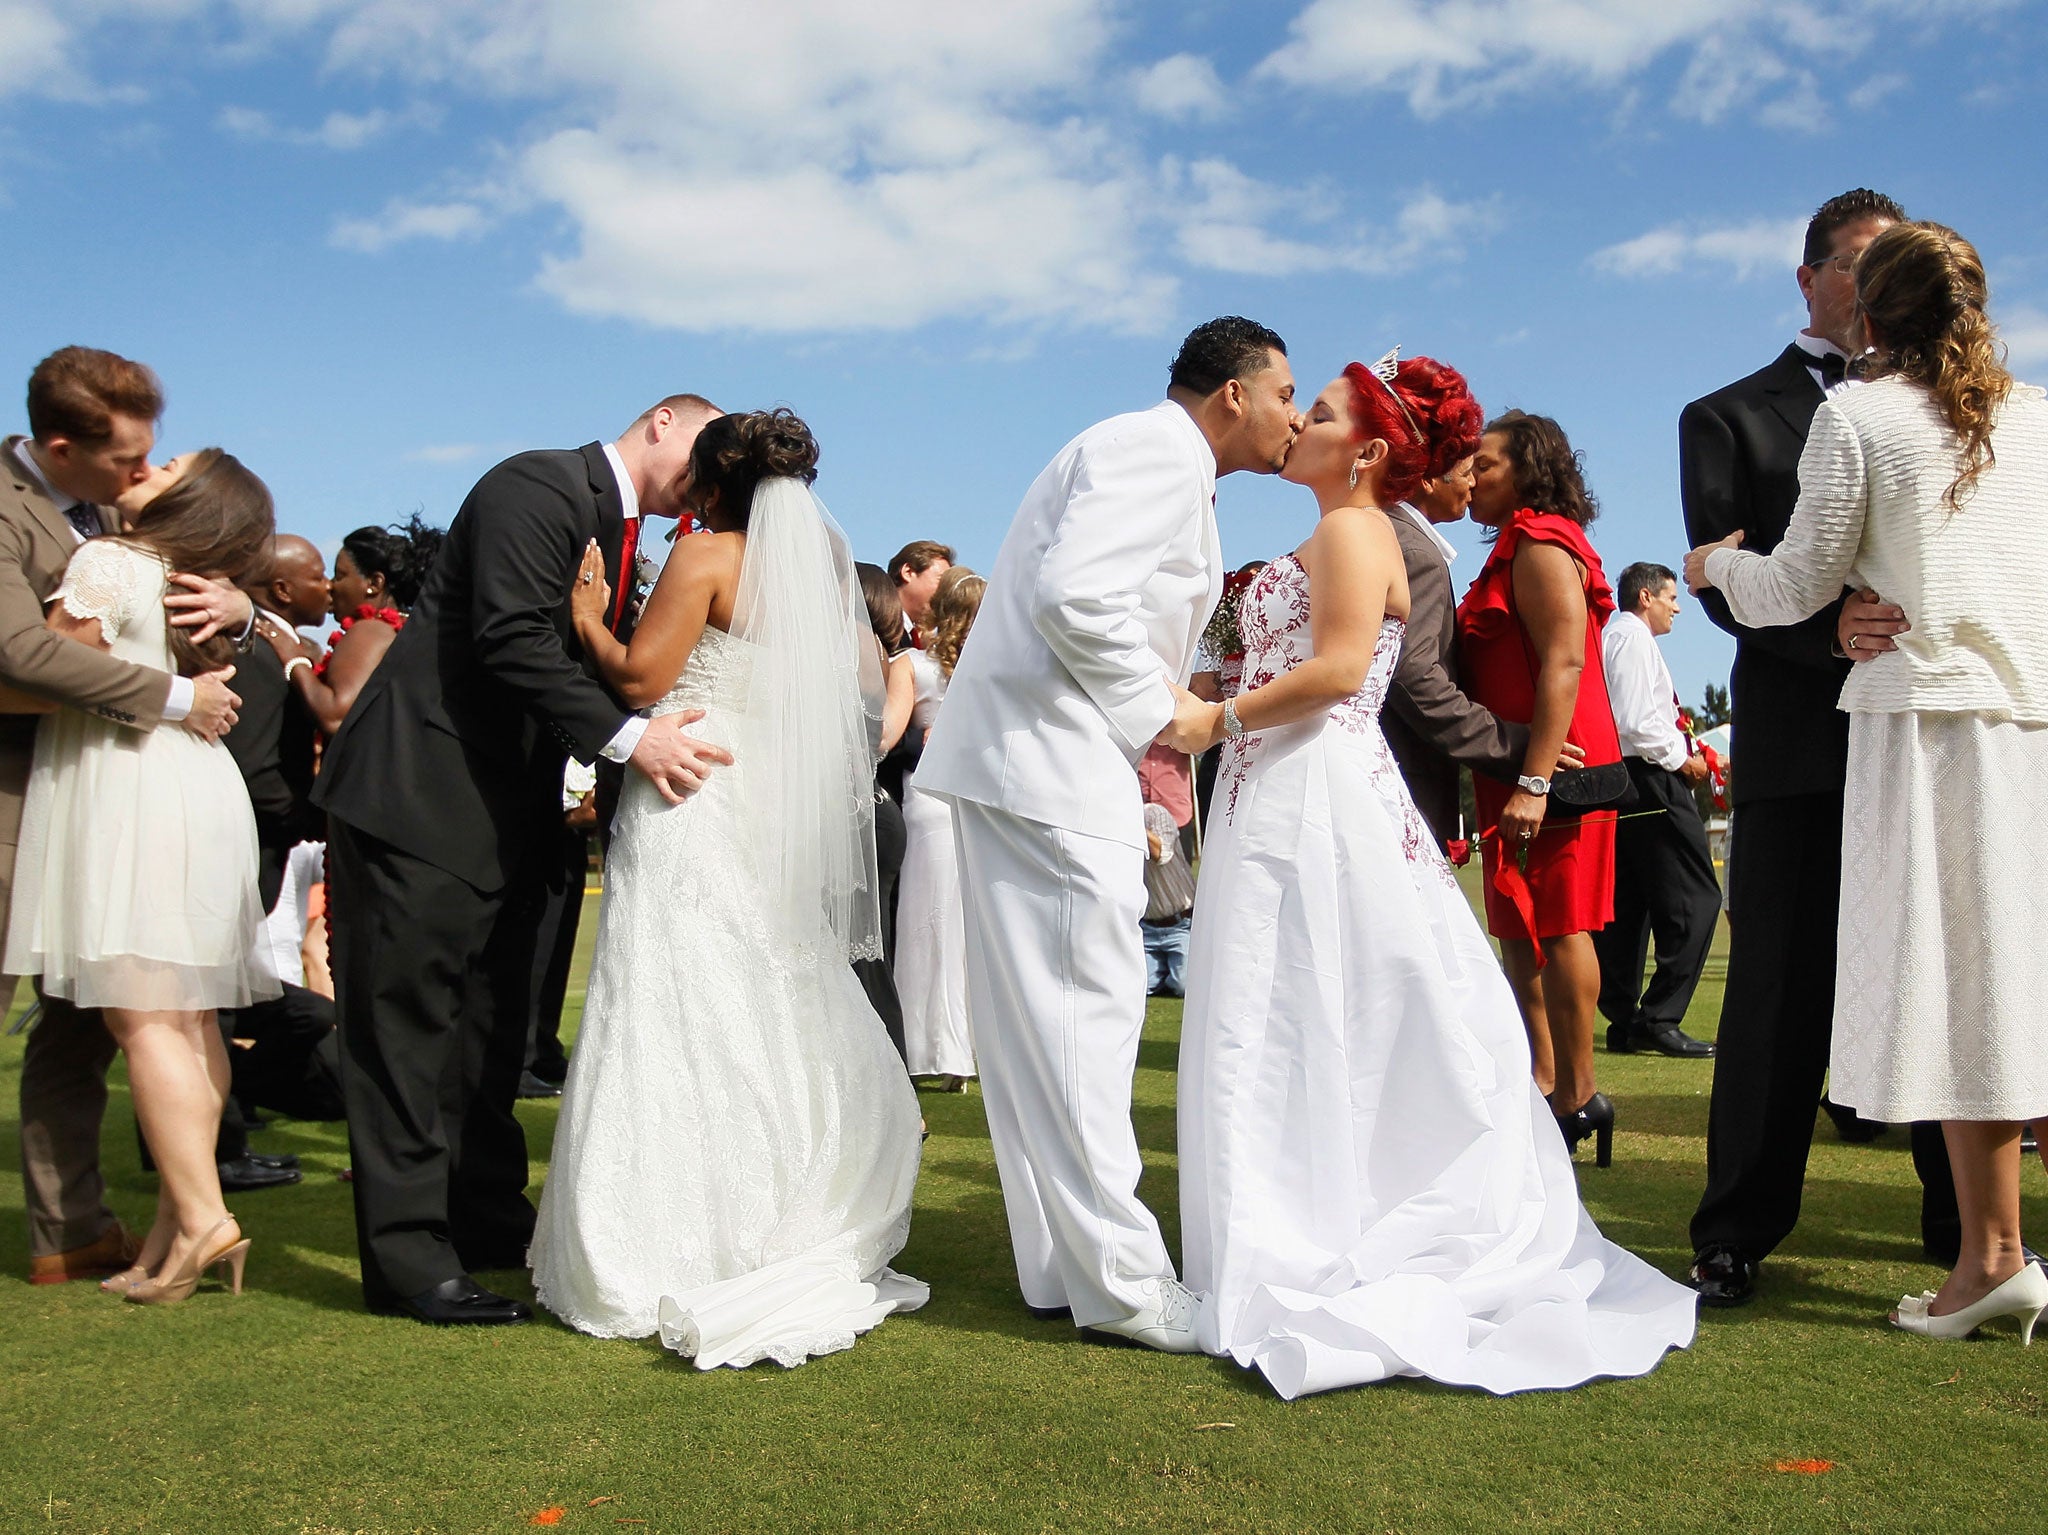 Jonah Klemm-Toole kisses his new wife, Elena Pizano, Kenny Dornhoefer kisses his new wife, Jaya Ganaishalm and Manuel Fuentes kisses his new wife, Monika Juarbe after being wed during a group Valentine's day wedding at the National Croquet Center on February 14, 2012 in West Palm Beach, Florida. The group wedding ceremony is put on by the Palm Beach Country Clerk & Comptroller's office and 30 couples to tied the knot.